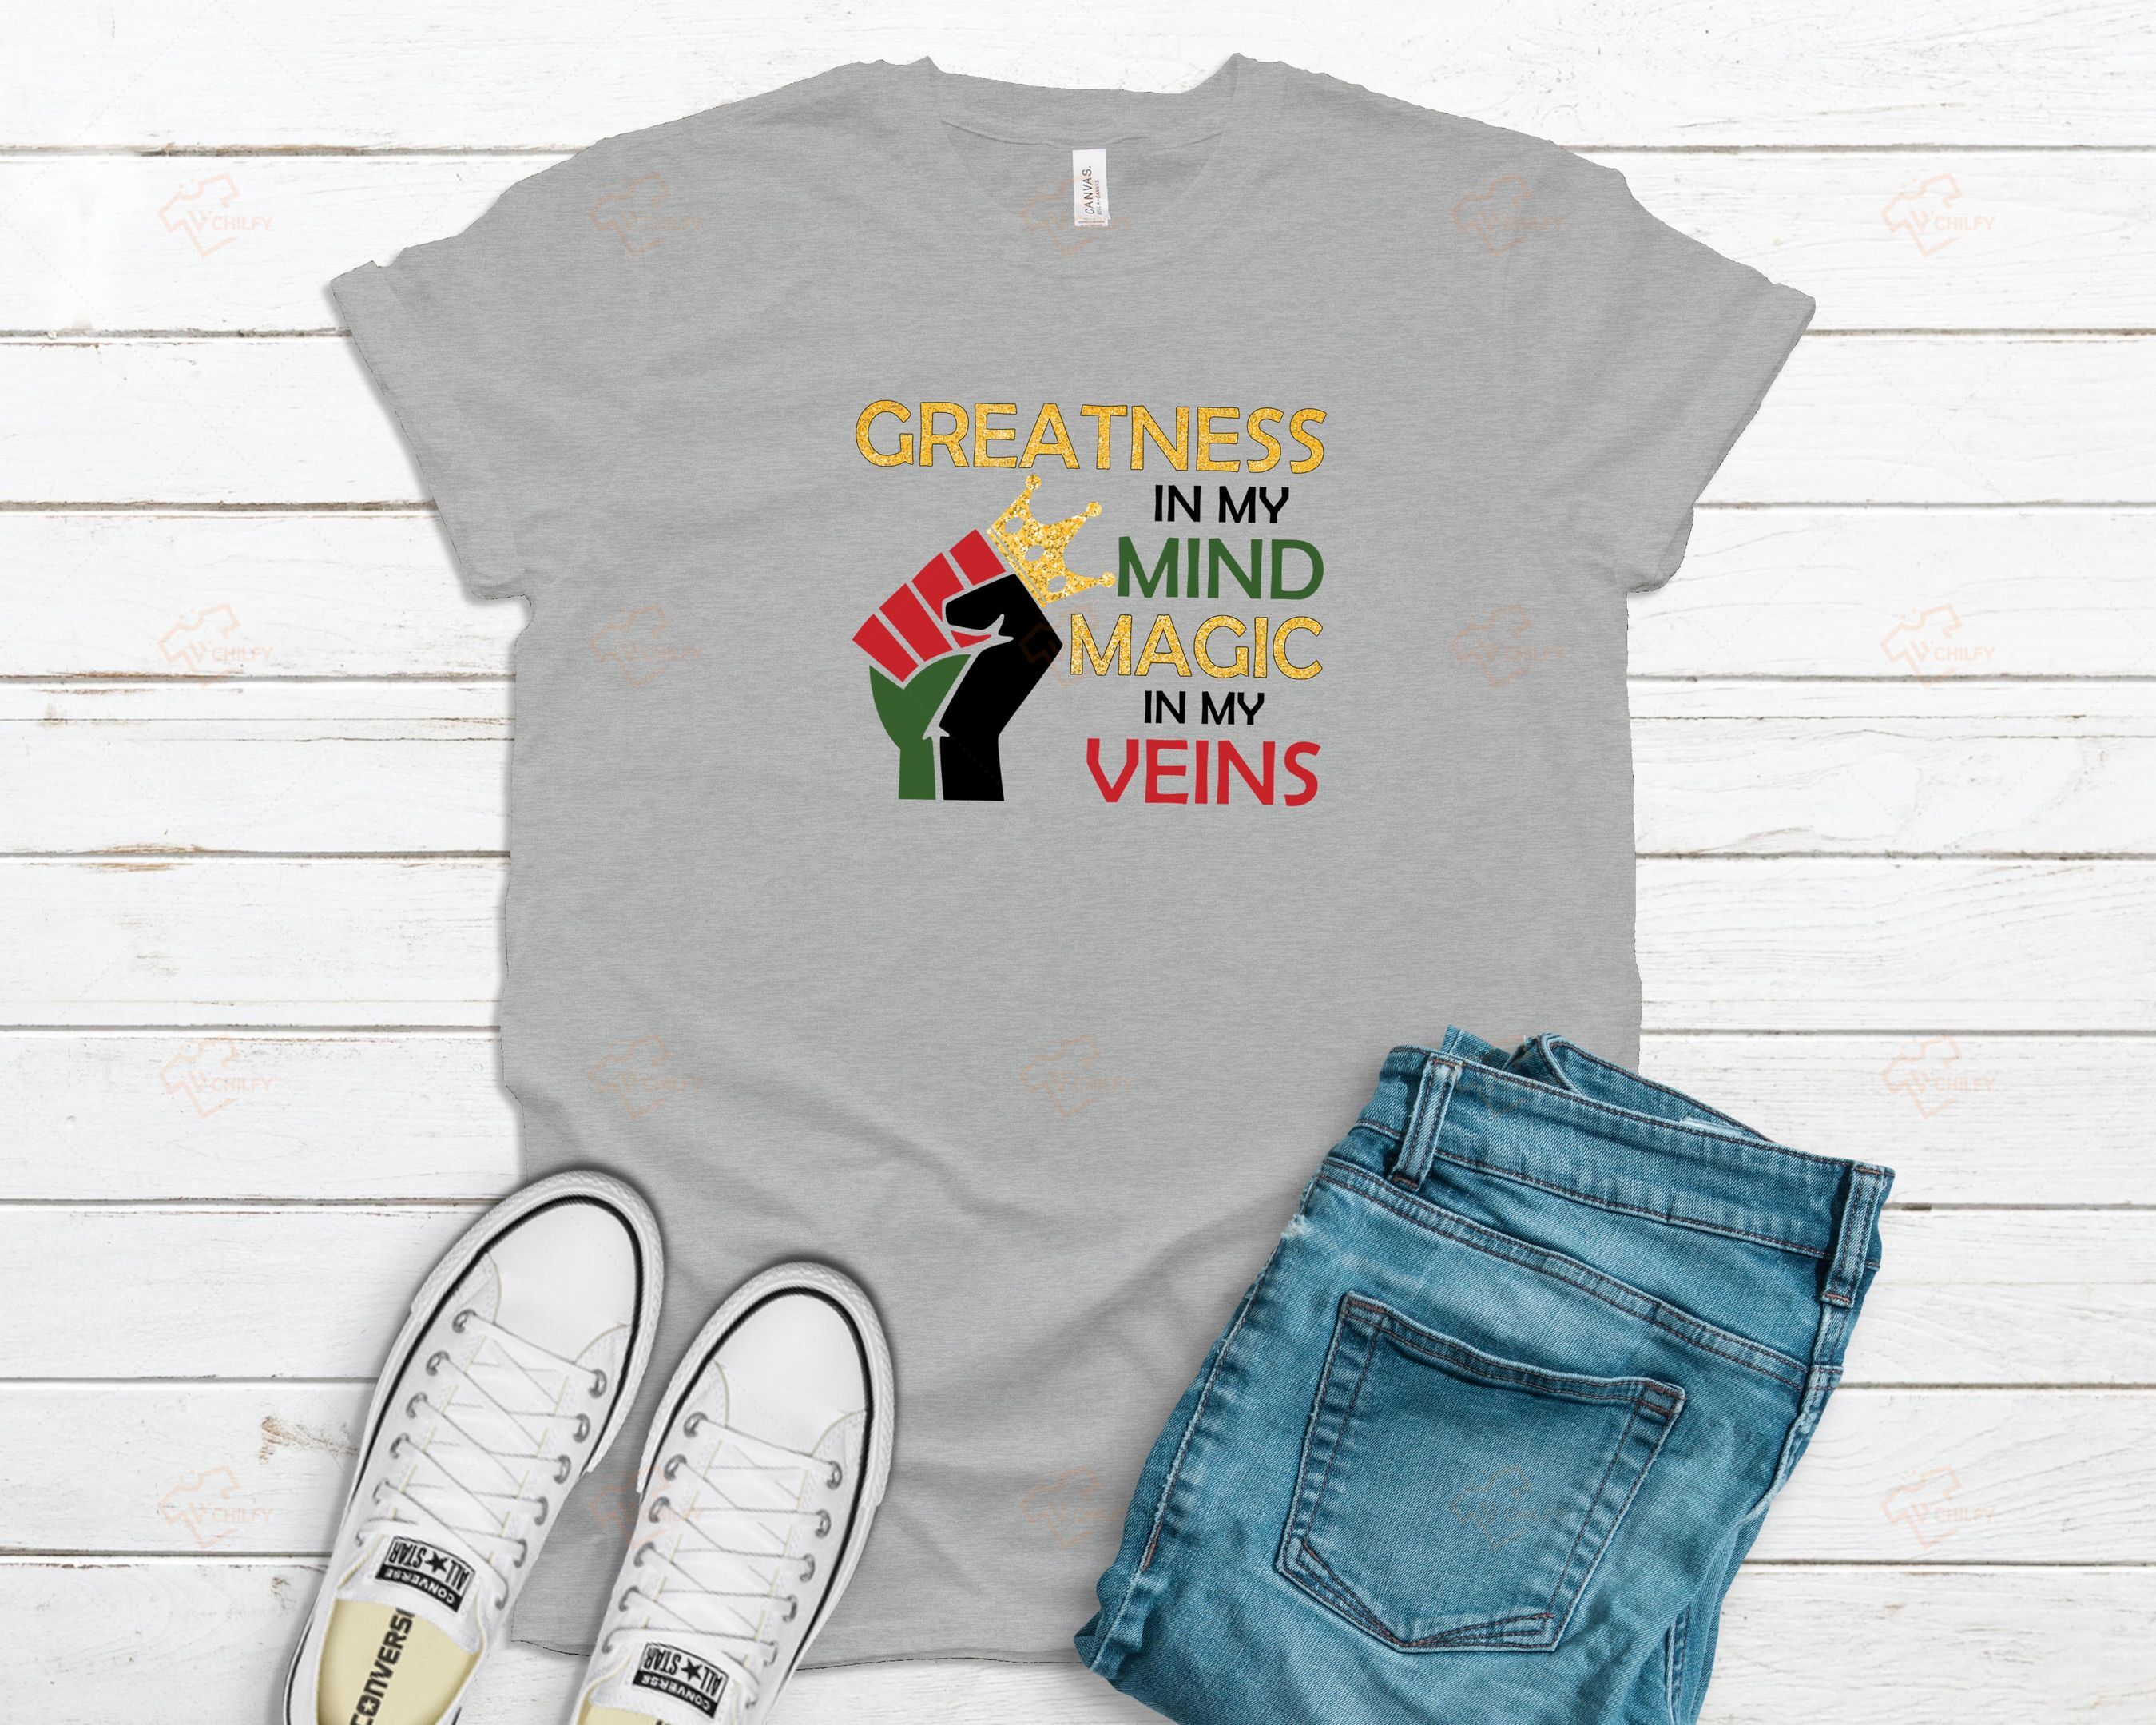 greatness in my mind magic in my veins shirt, black lives matter shirt